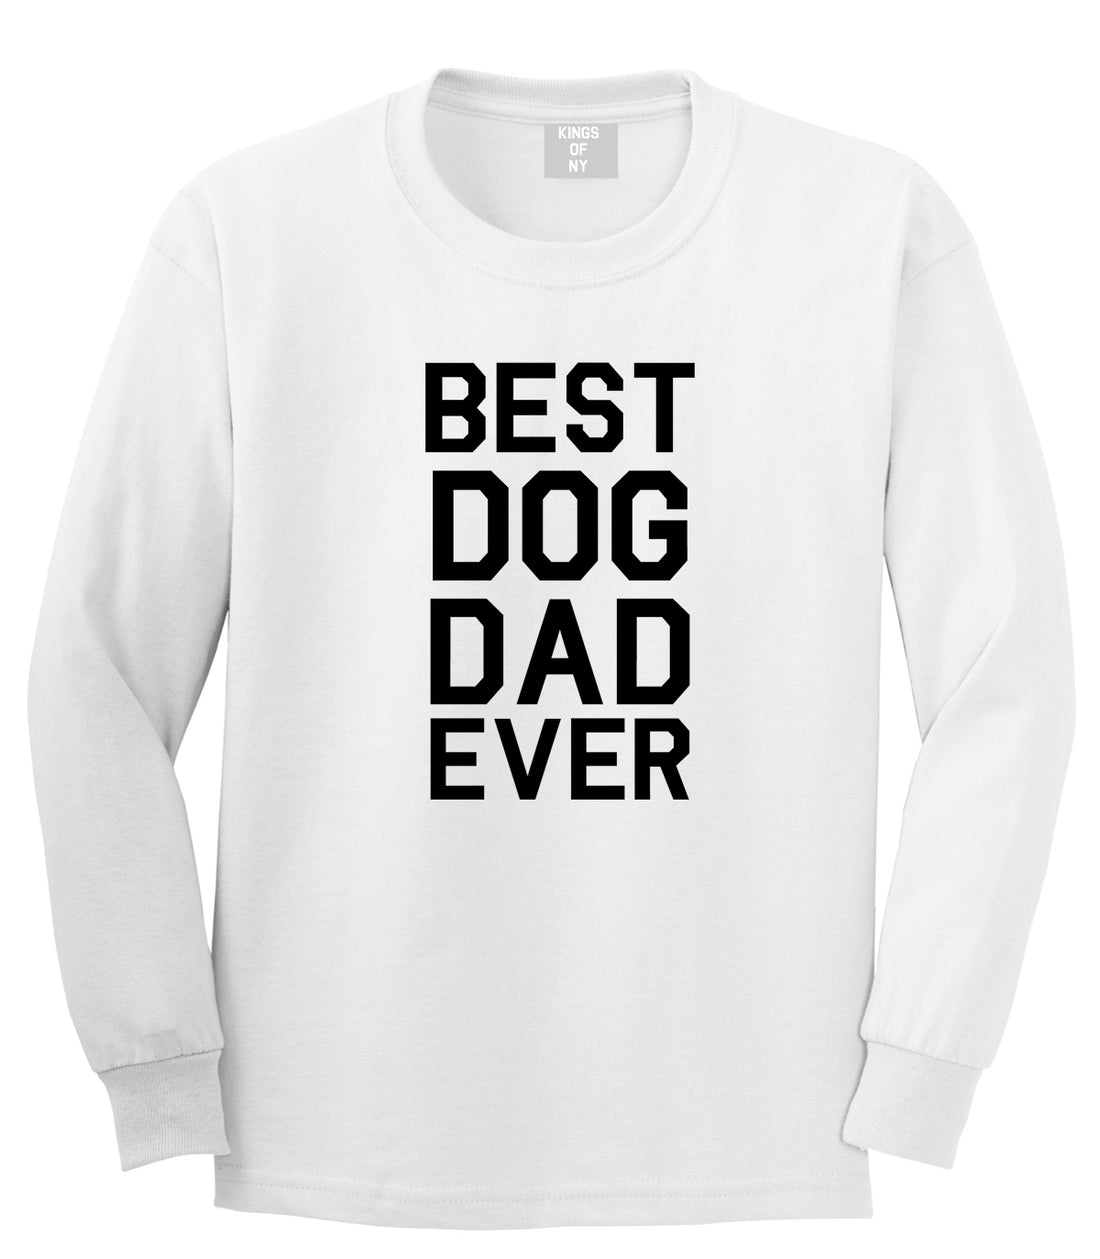 Best Dog Dad Ever Mens White Long Sleeve T-Shirt by Kings Of NY